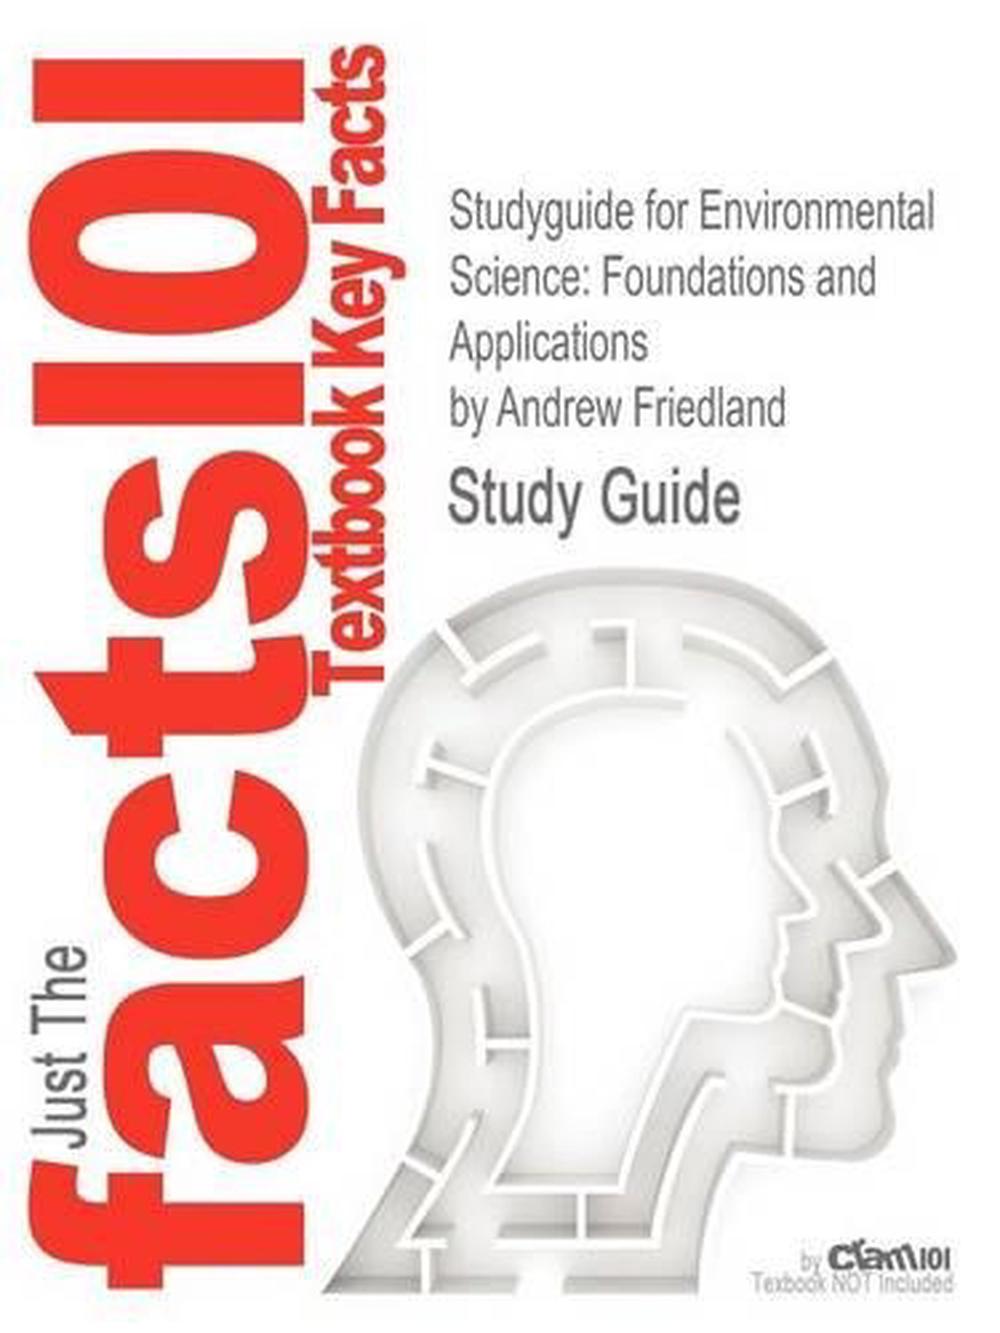 Studyguide for Environmental Science Foundations and Applications by